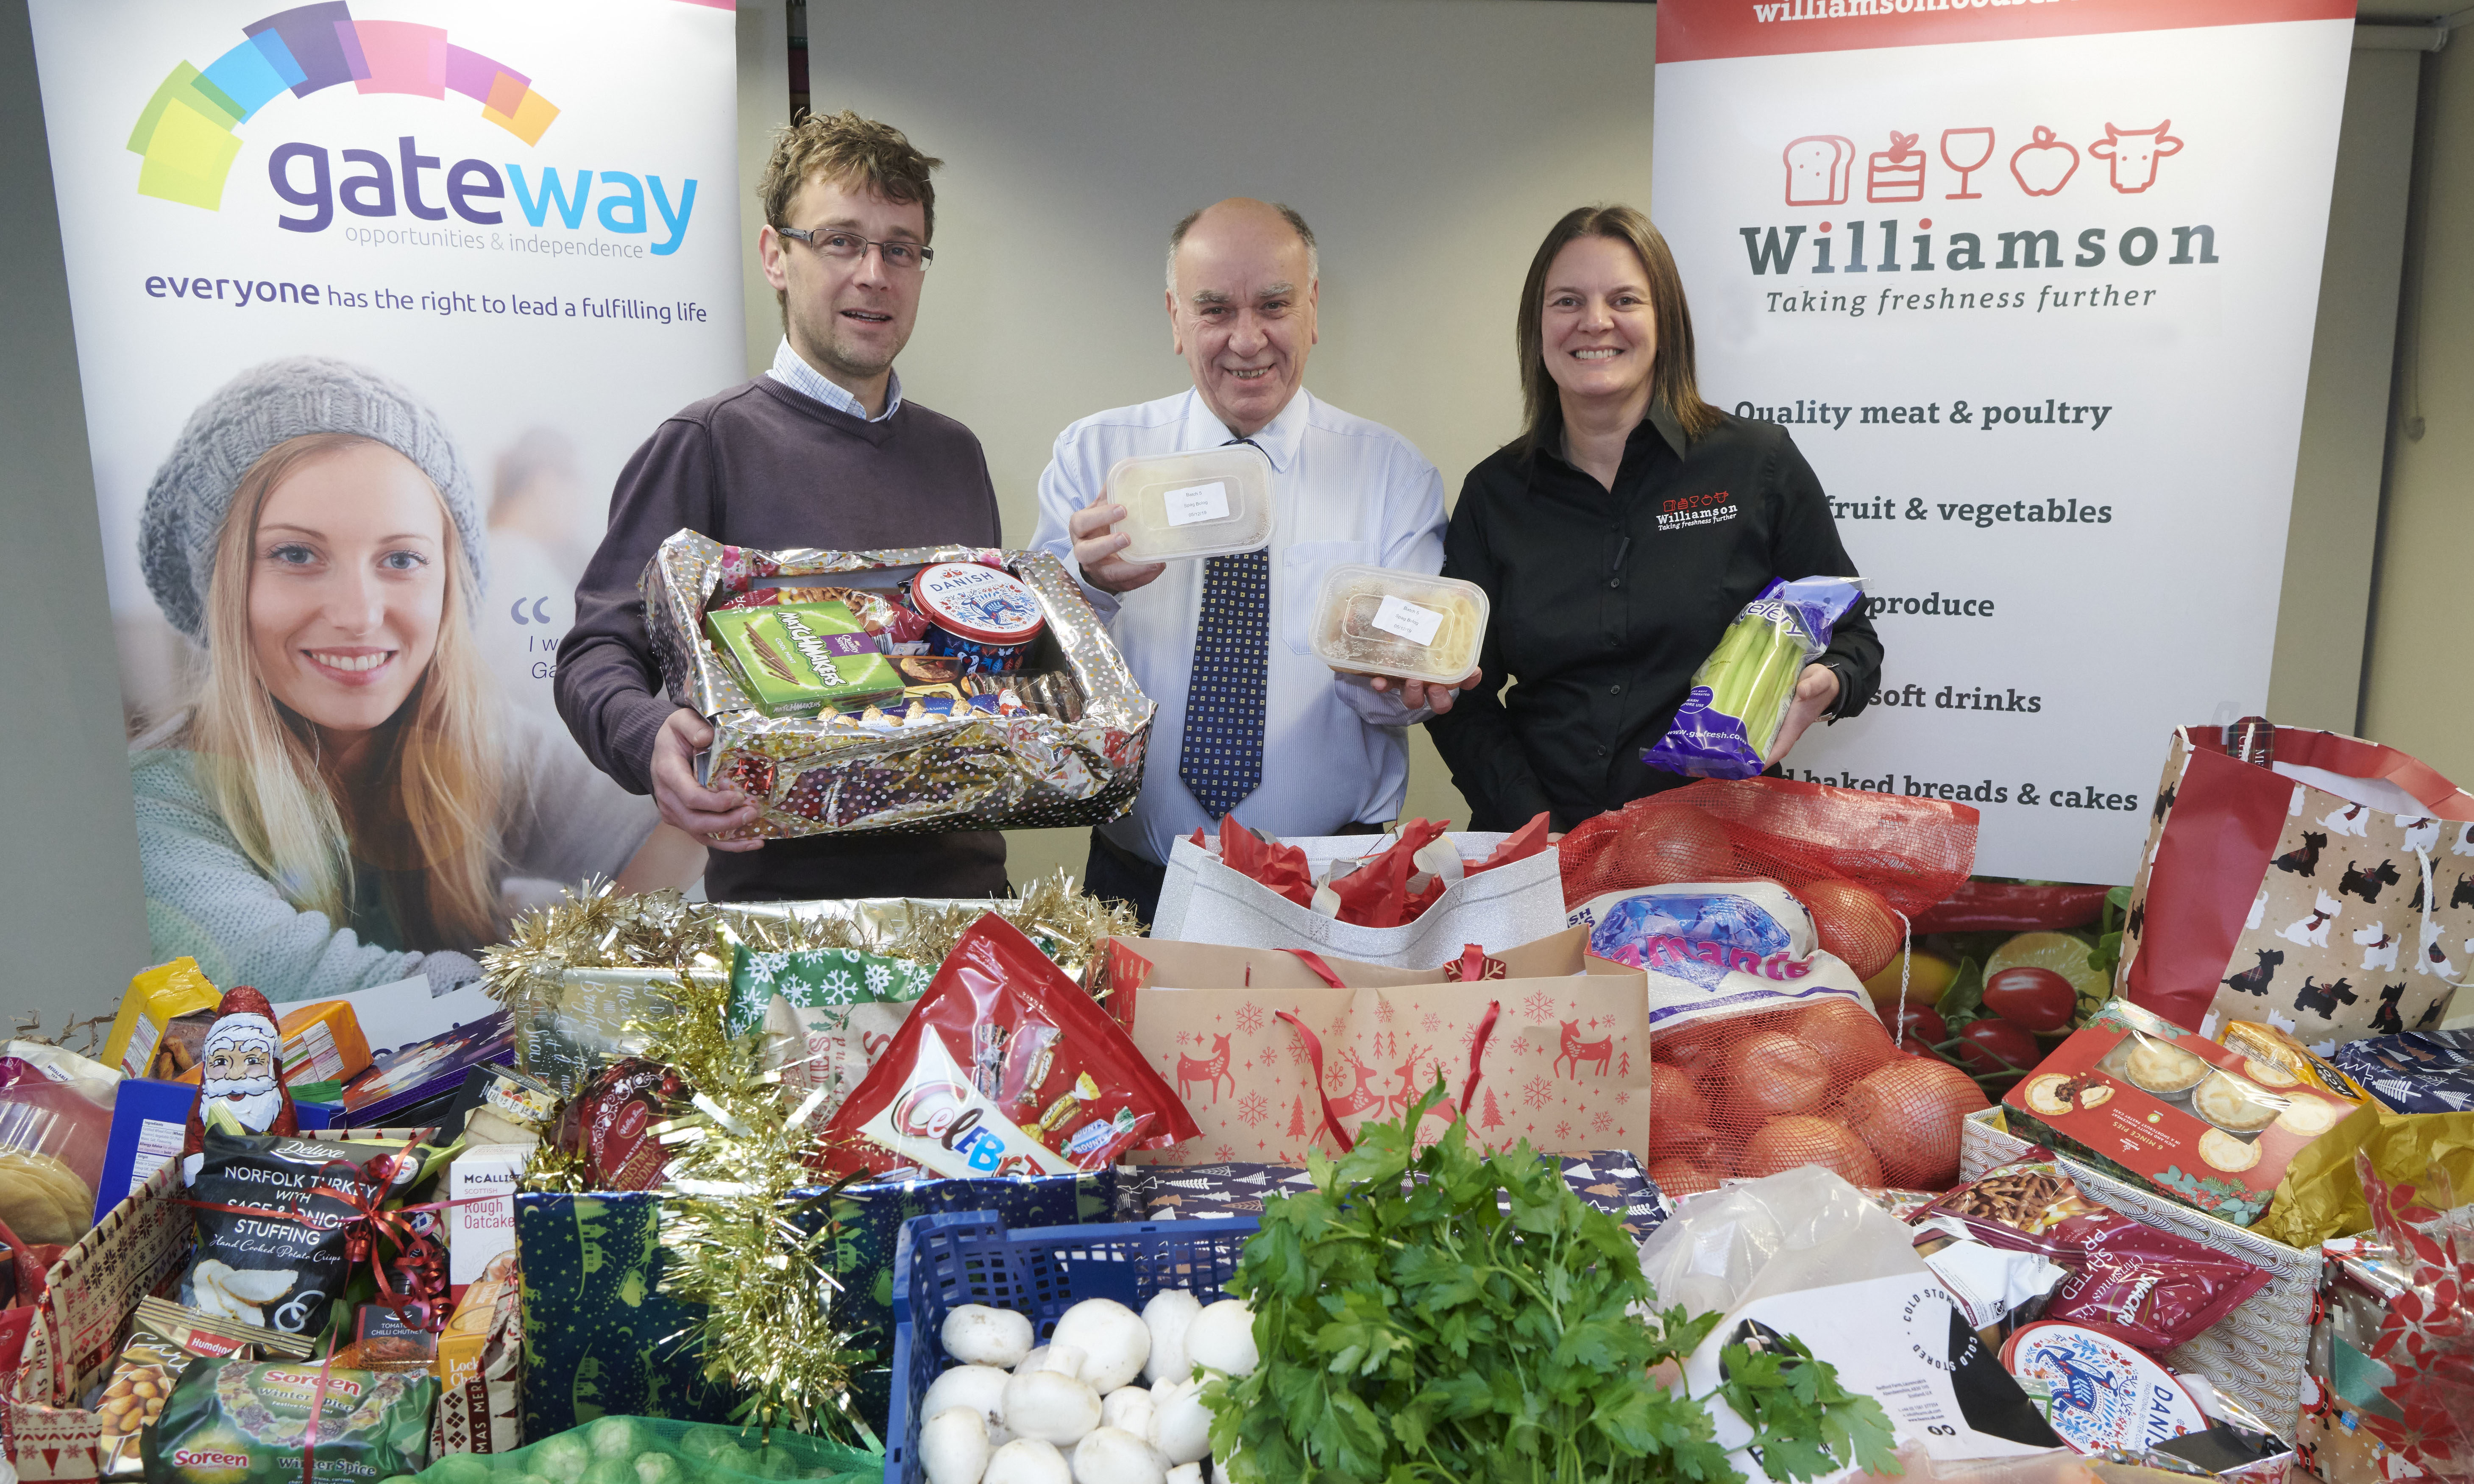 Craig Riddle, Gateway finance manager, David Sutherland, Food For Families founder, and Louise Beattie, sales manager for Williamson Foodservice with the food items ready for distribution